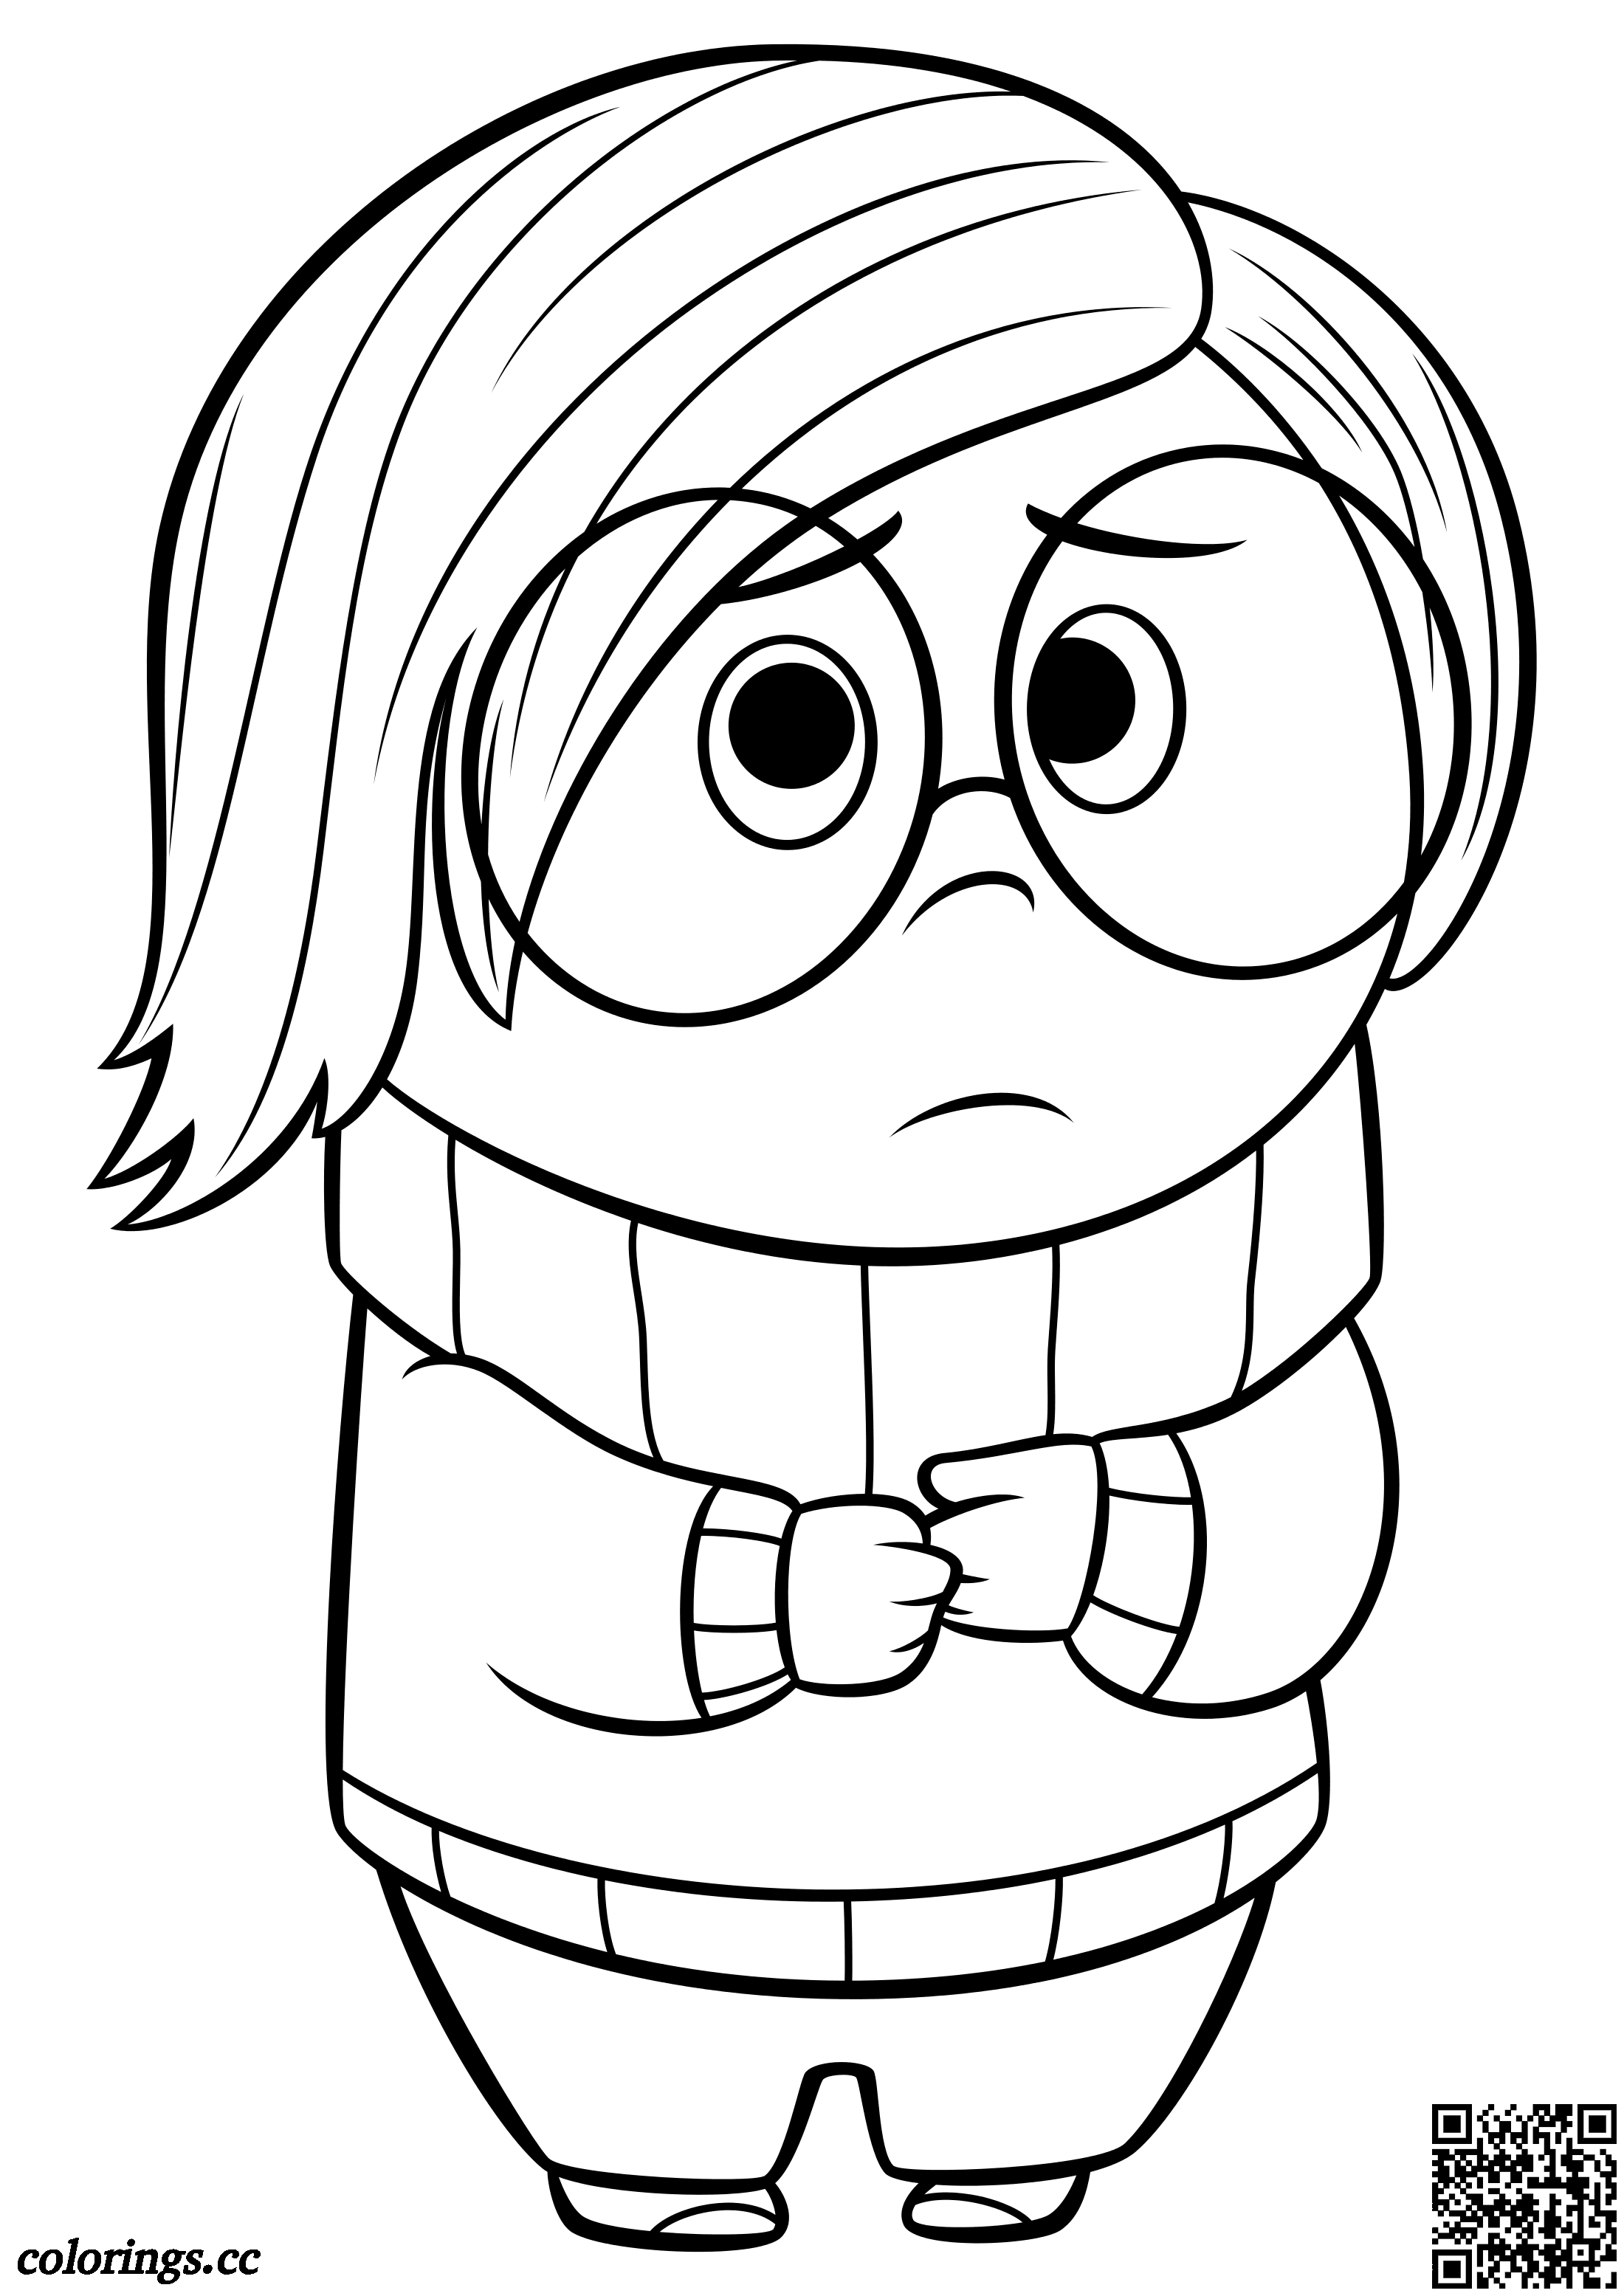 Sadness coloring pages, Puzzle coloring pages   Colorings.cc